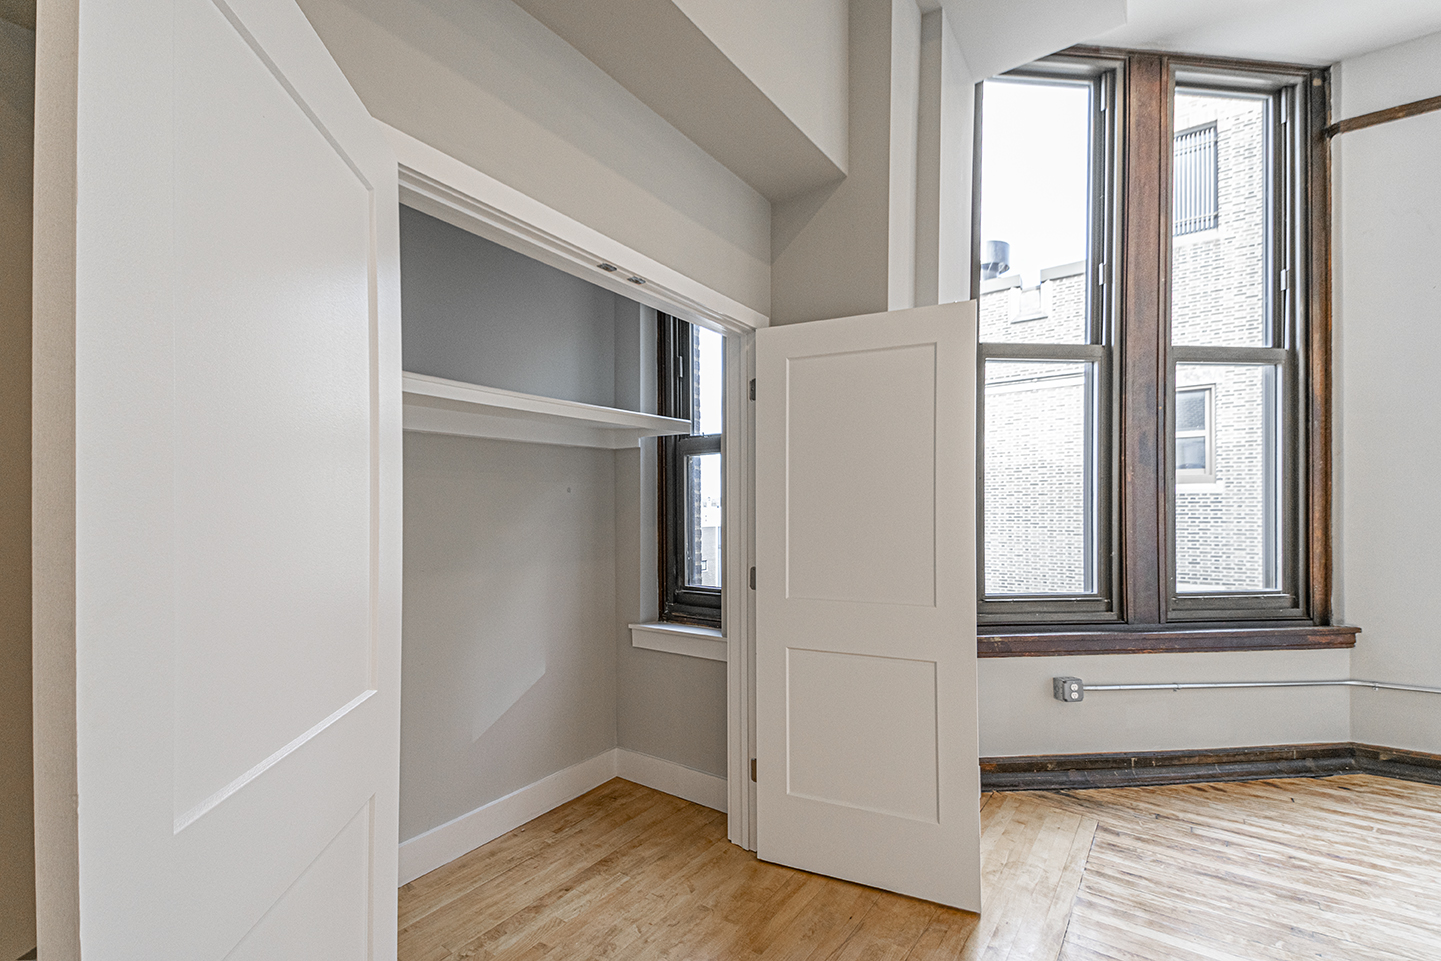 Property Photo For 1300 S. 19th St, Unit 103